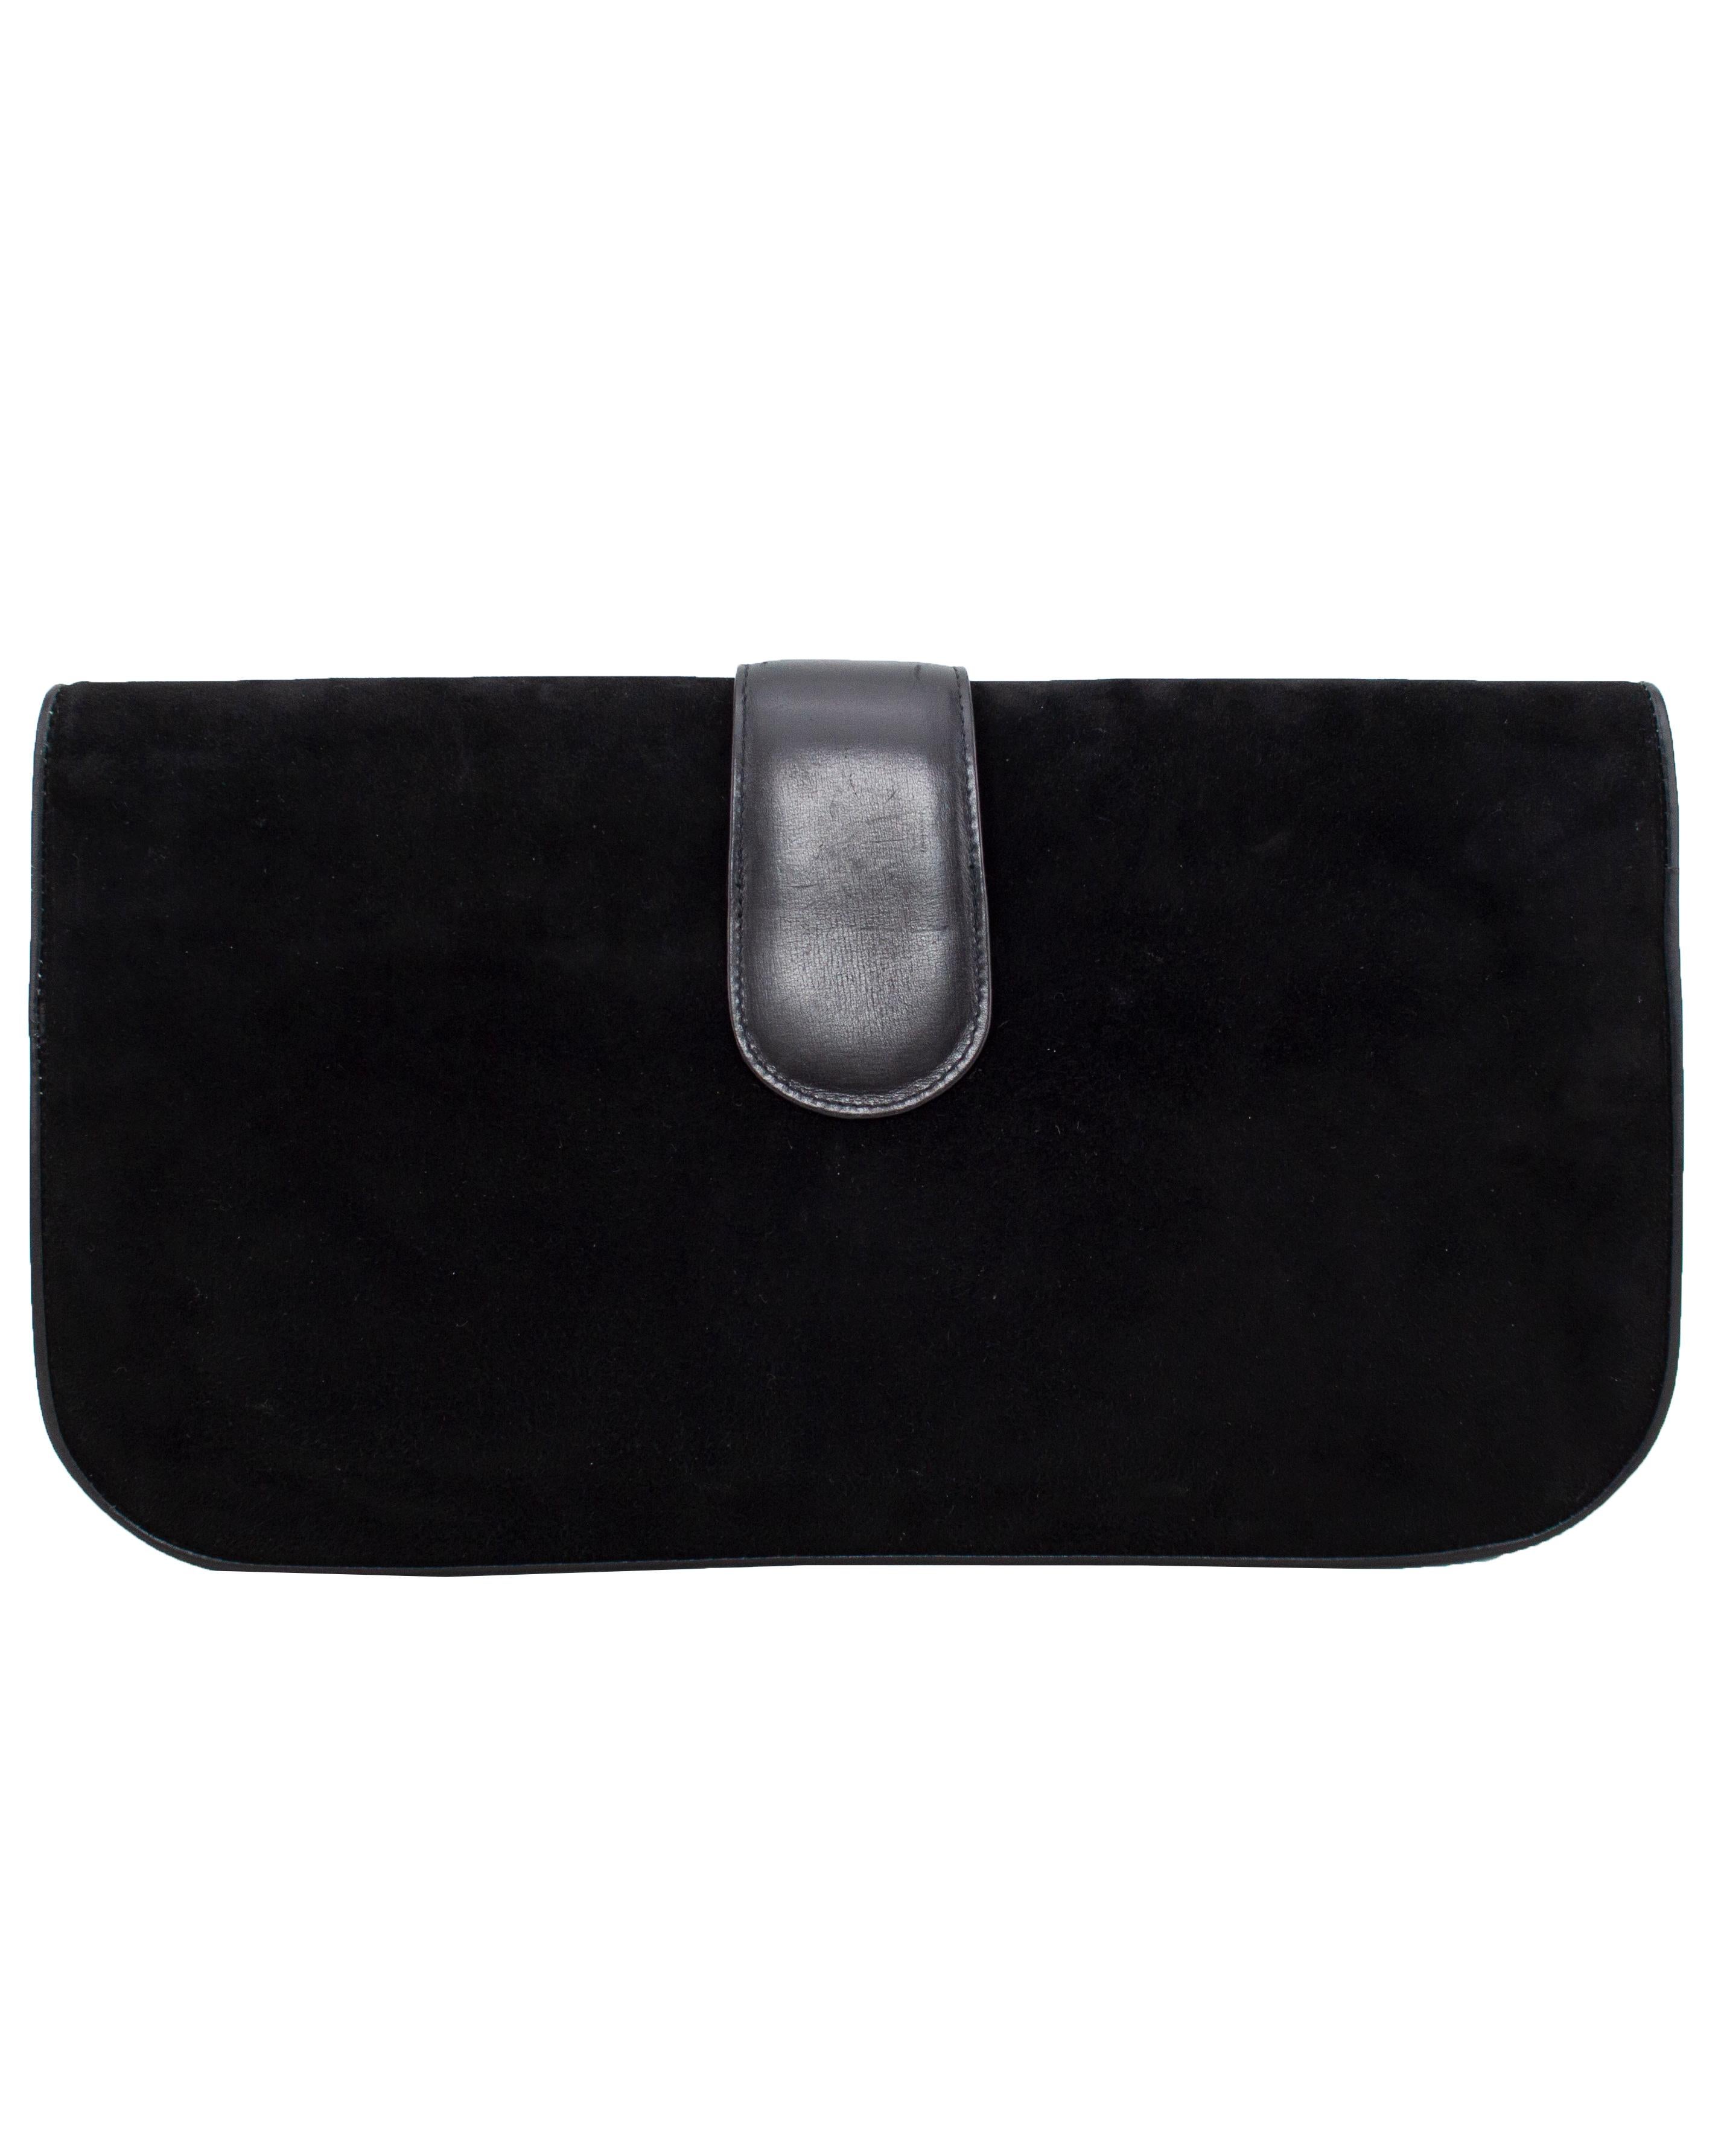 1970s Gucci Black Suede Large Clutch  In Good Condition For Sale In Toronto, Ontario